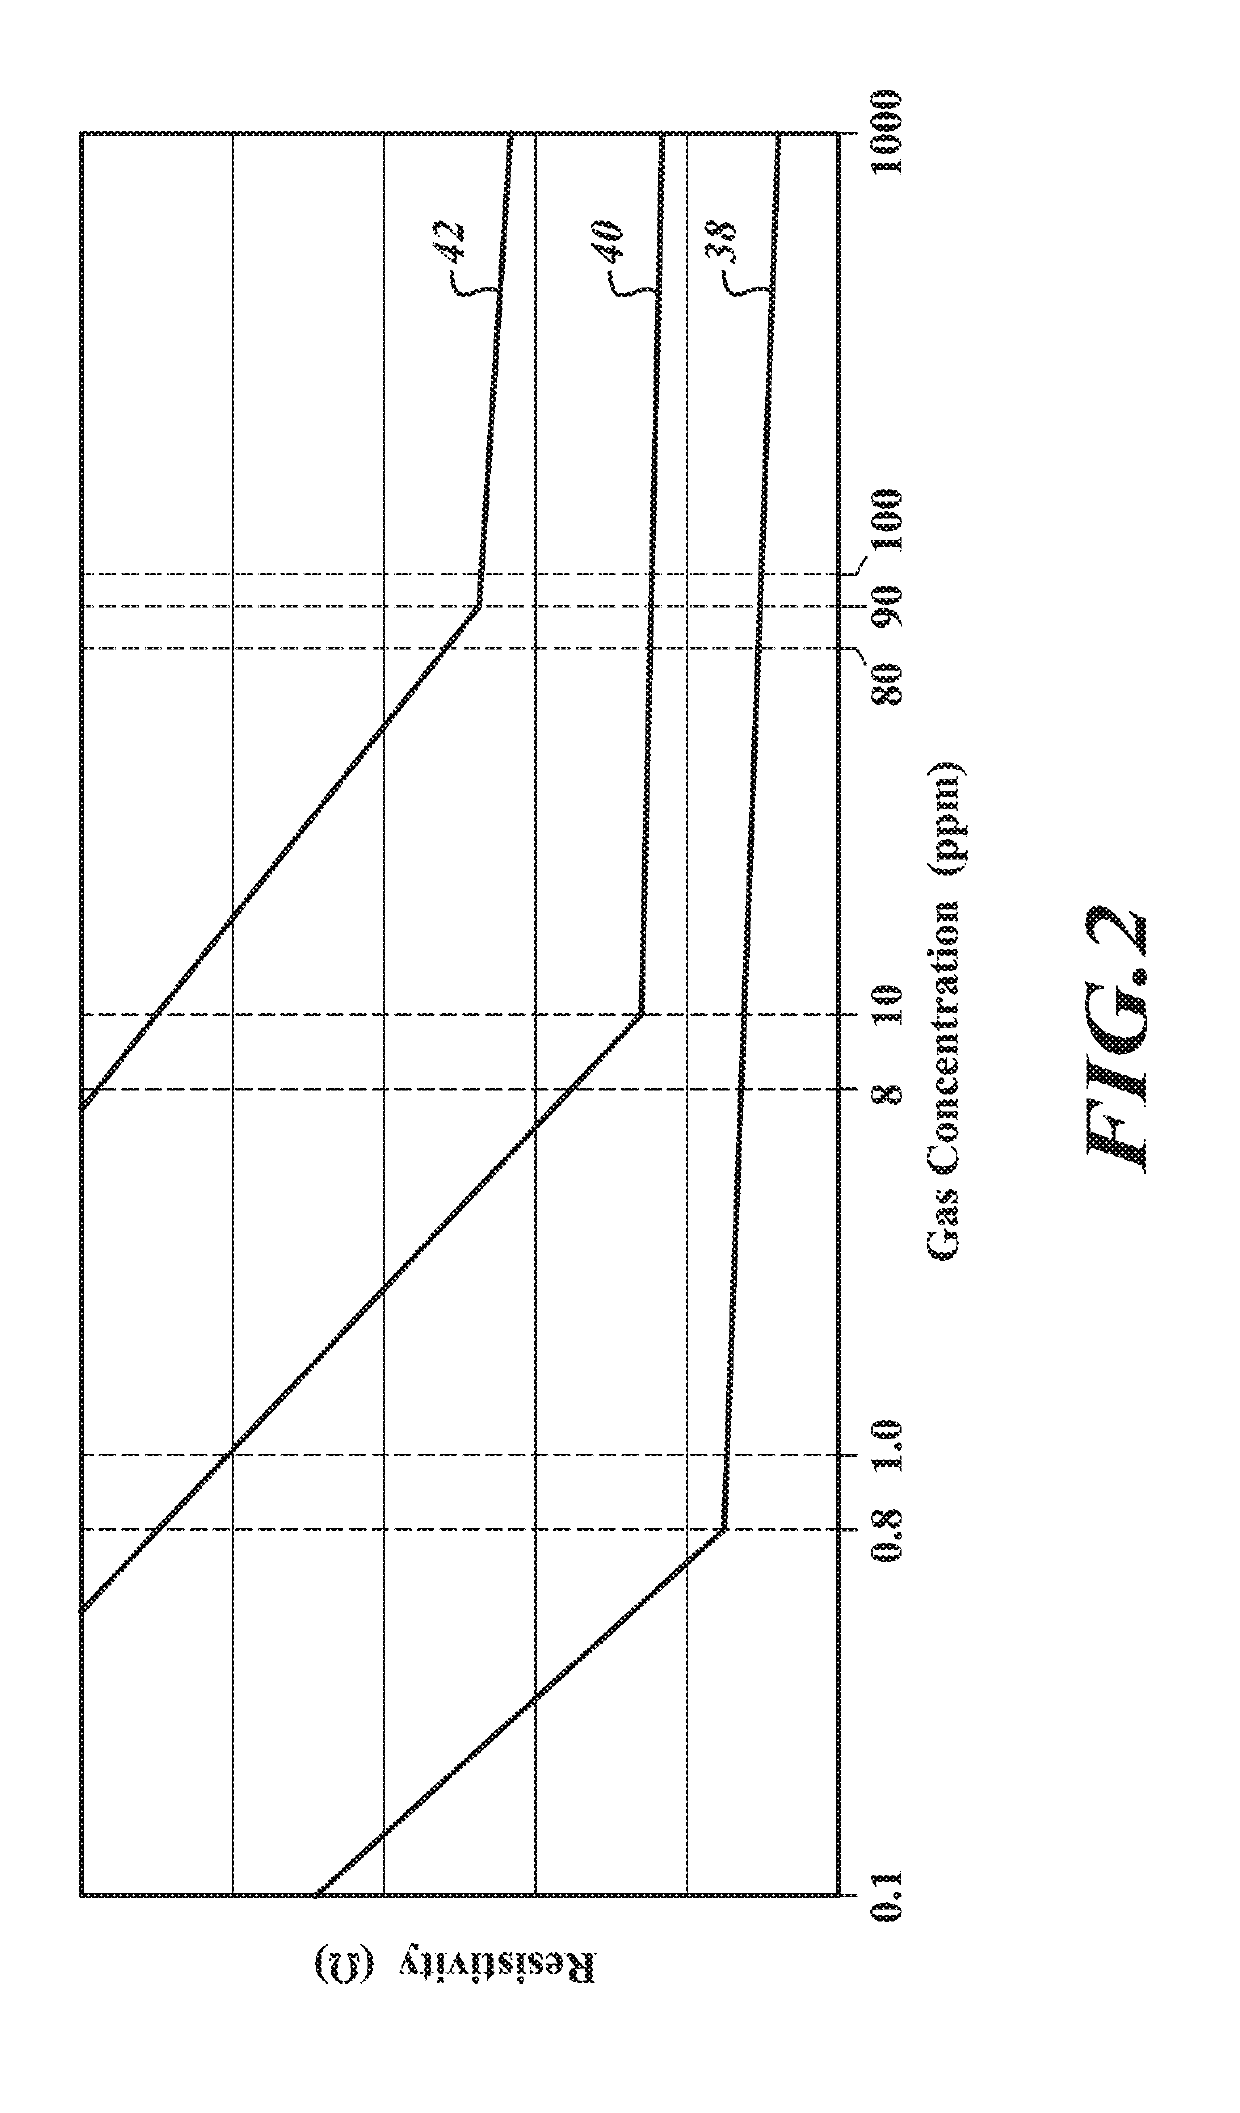 Adaptive test method and designs for low power mox sensor